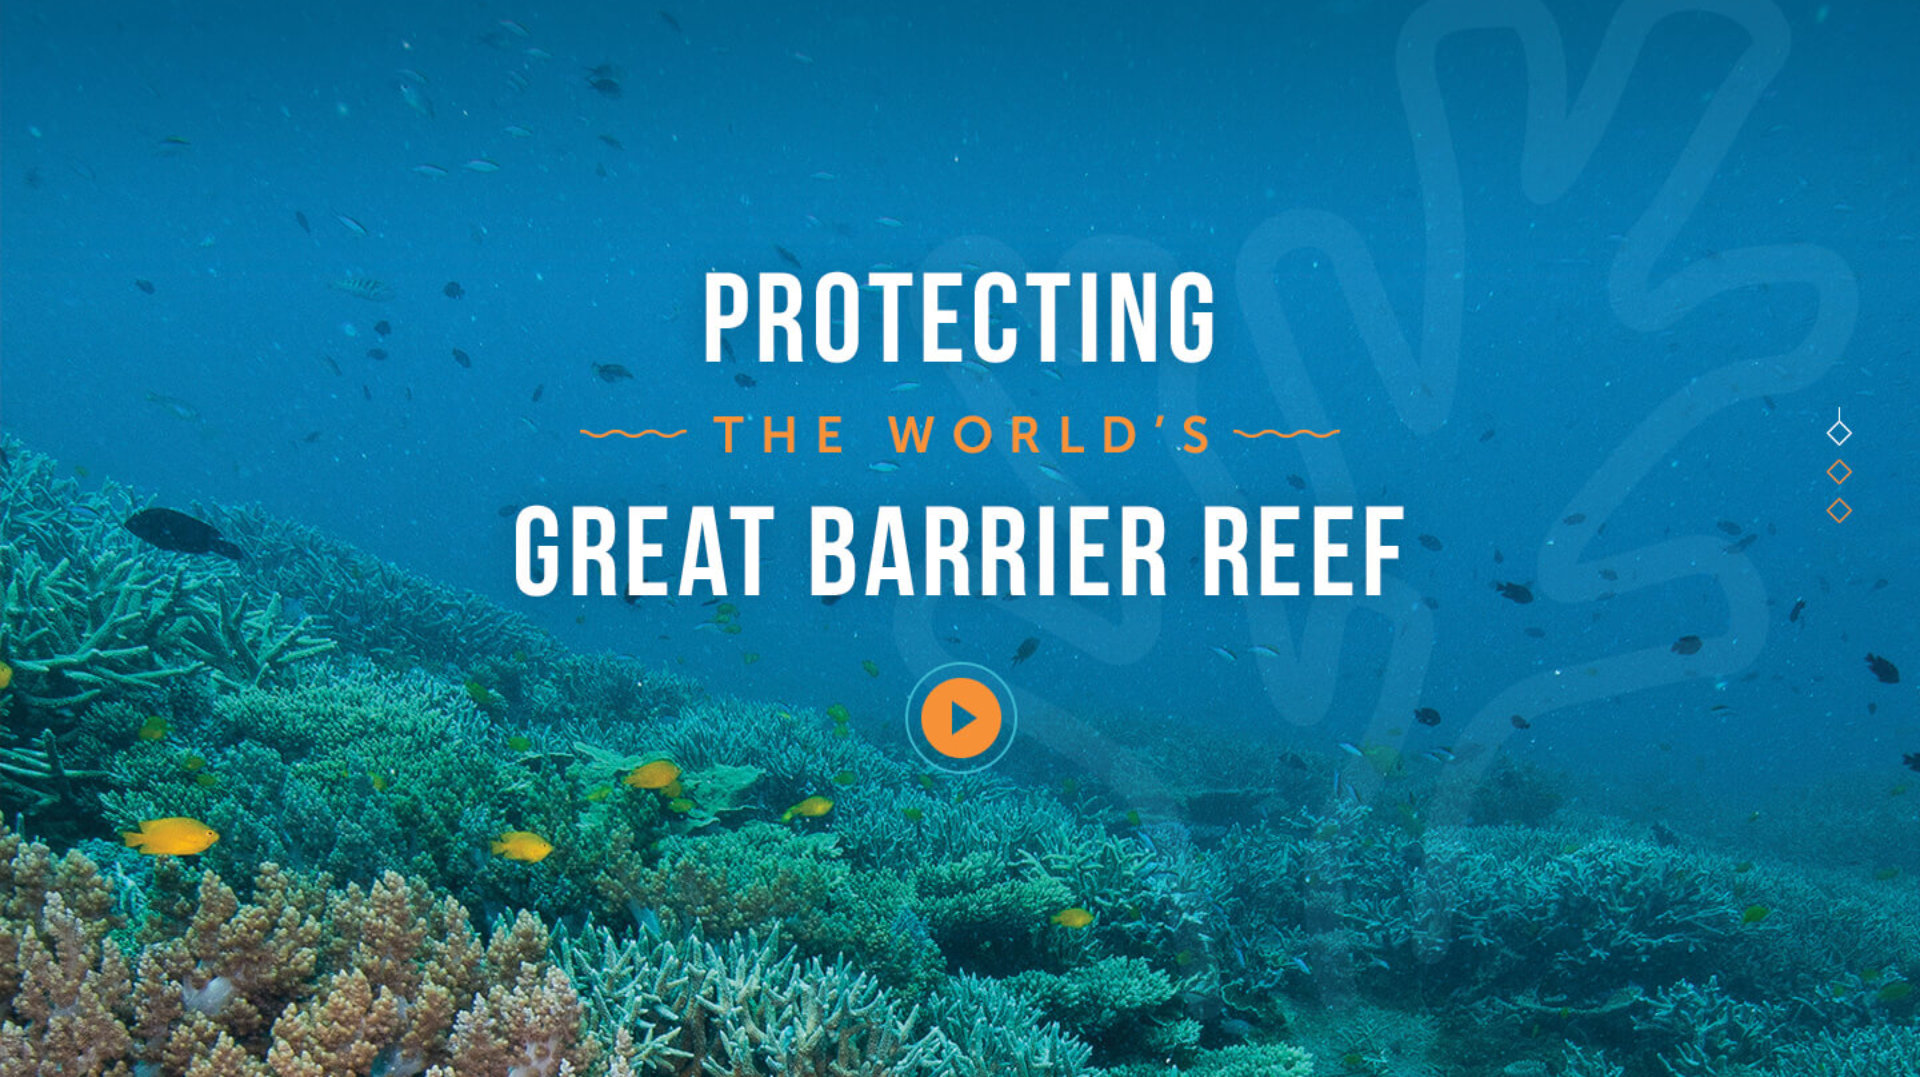 New Resourcing the Reef Drupal site launched